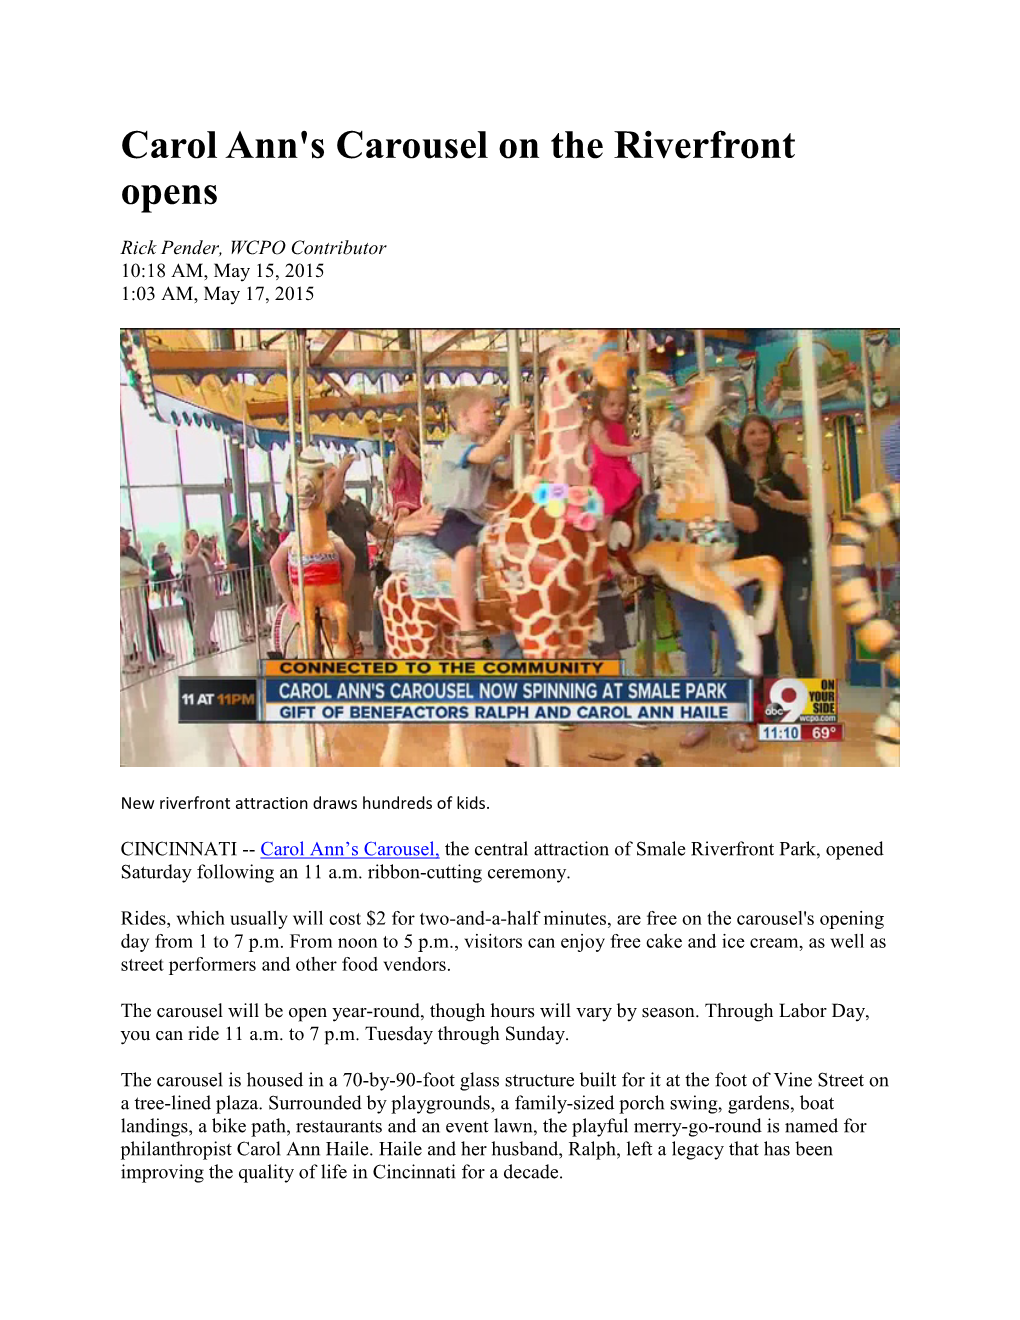 Carol Ann's Carousel on the Riverfront Opens